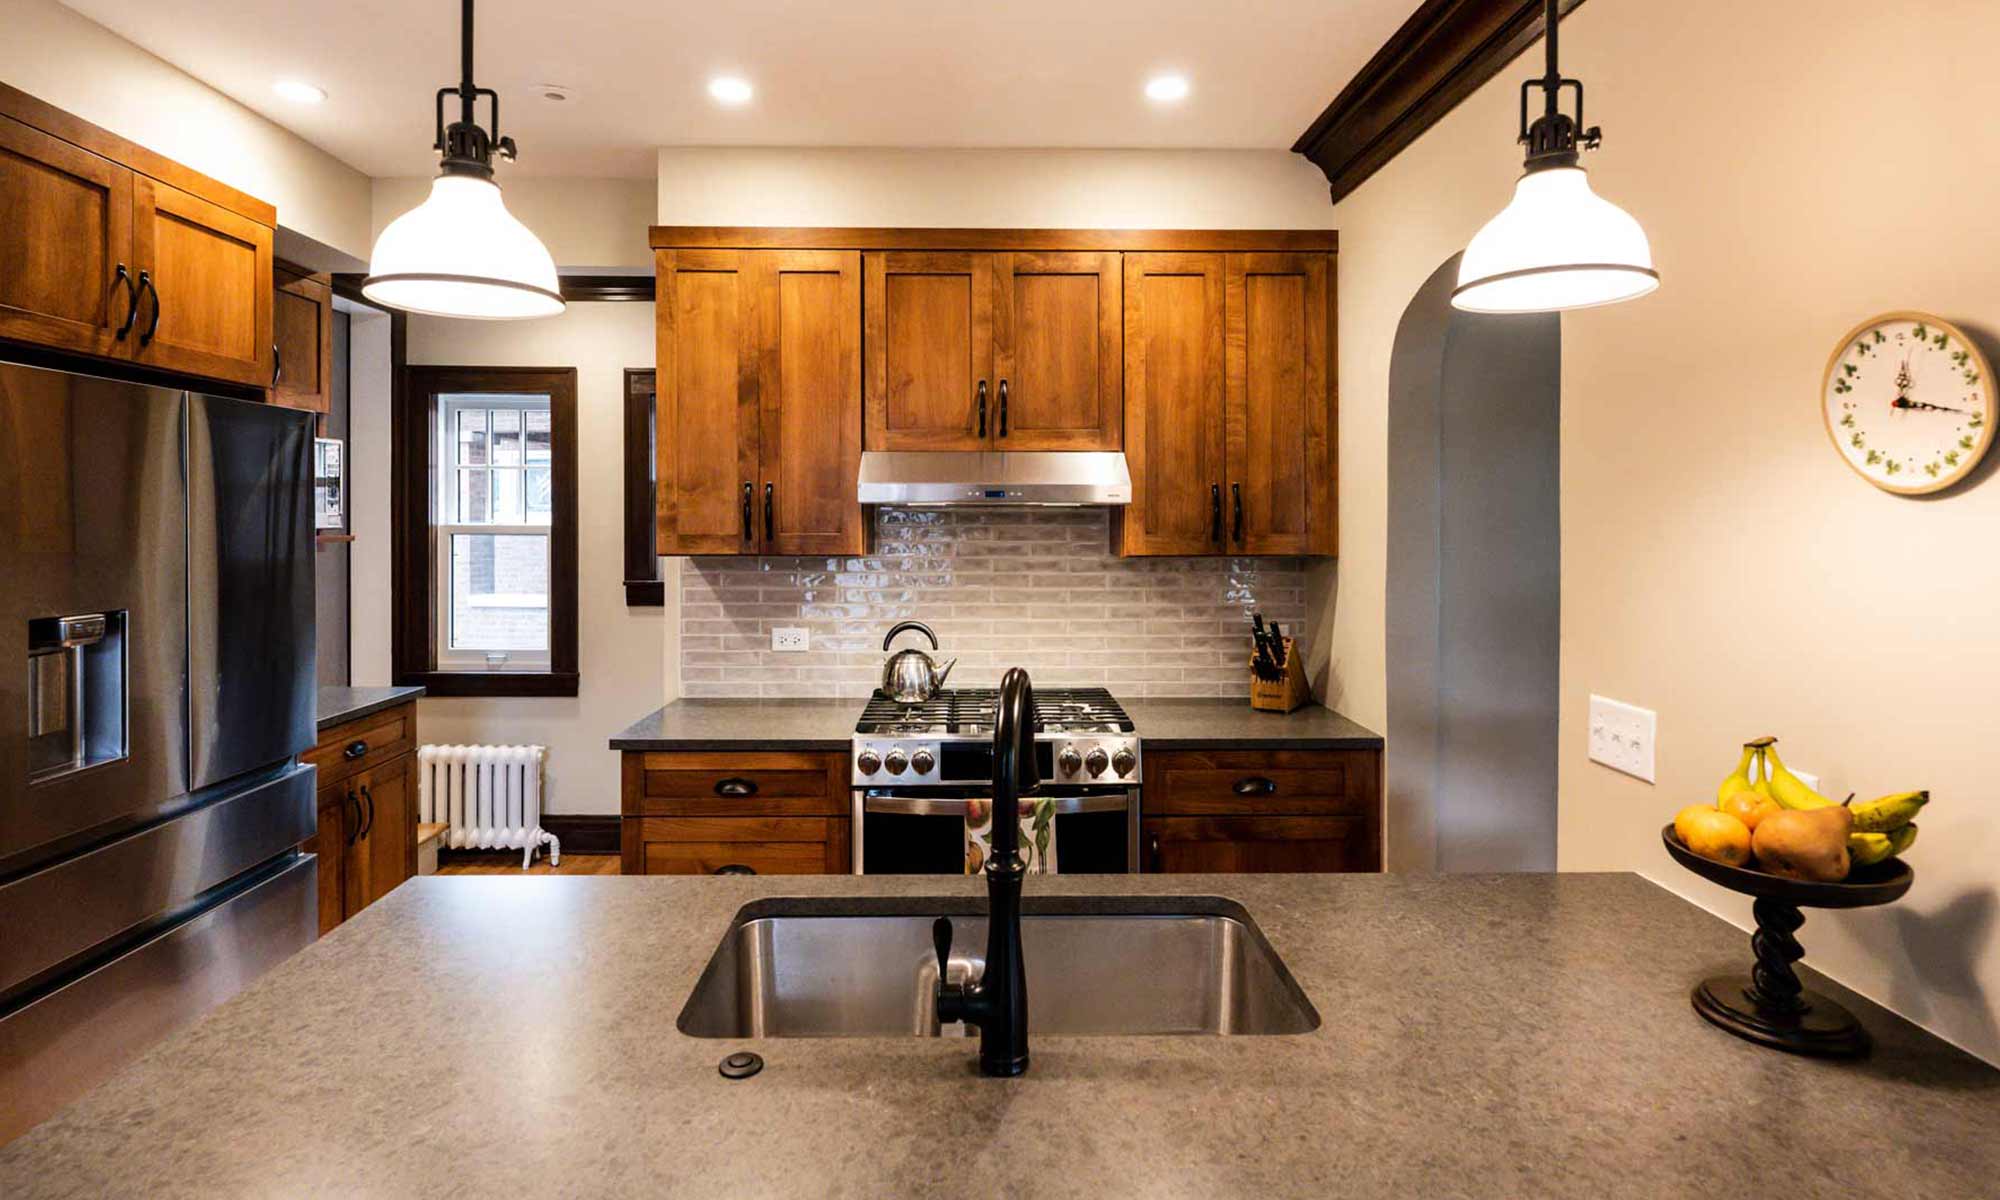 dark wood kitchen cabinets with peninsula seating